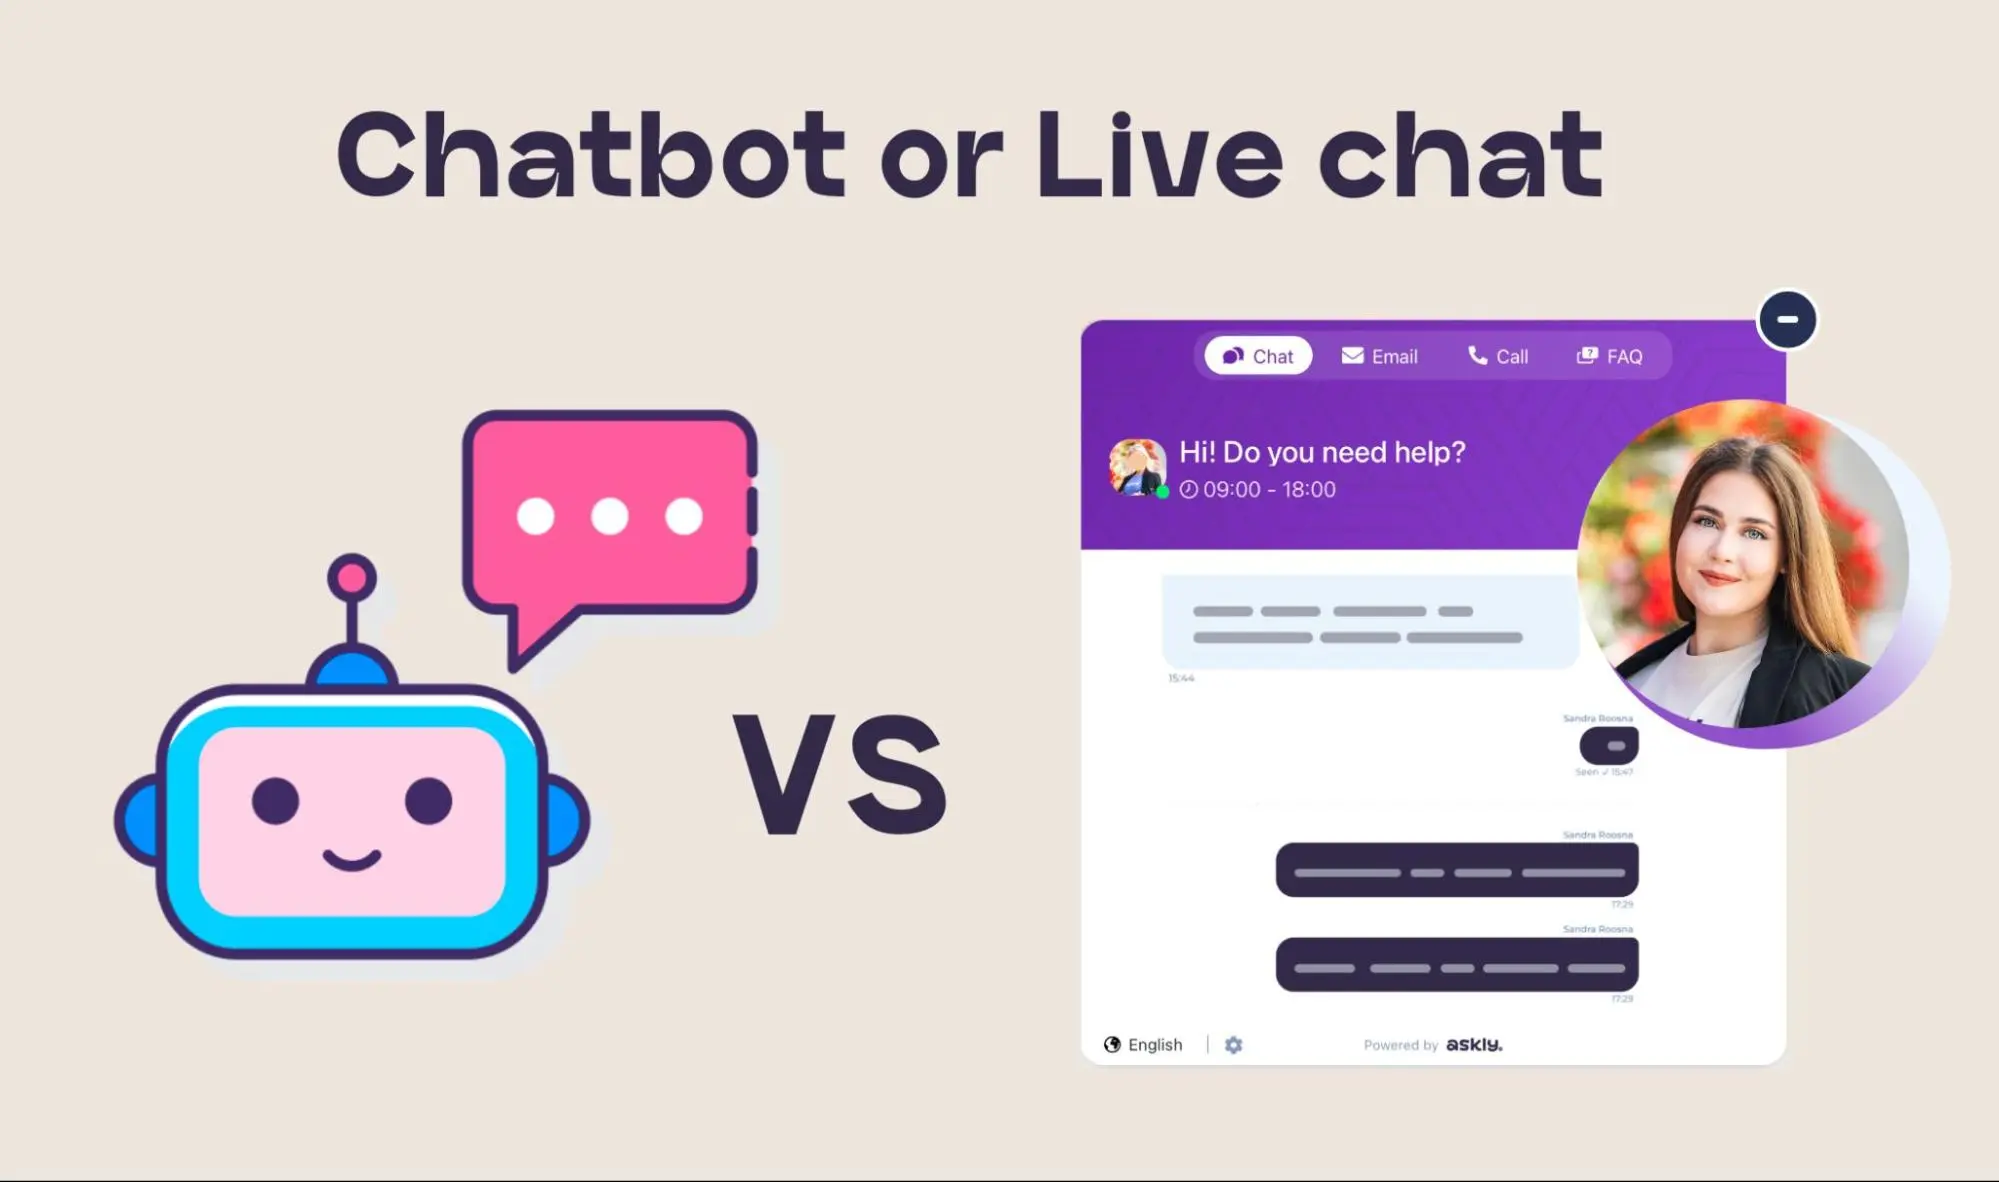 Comparing chatbot or live chat